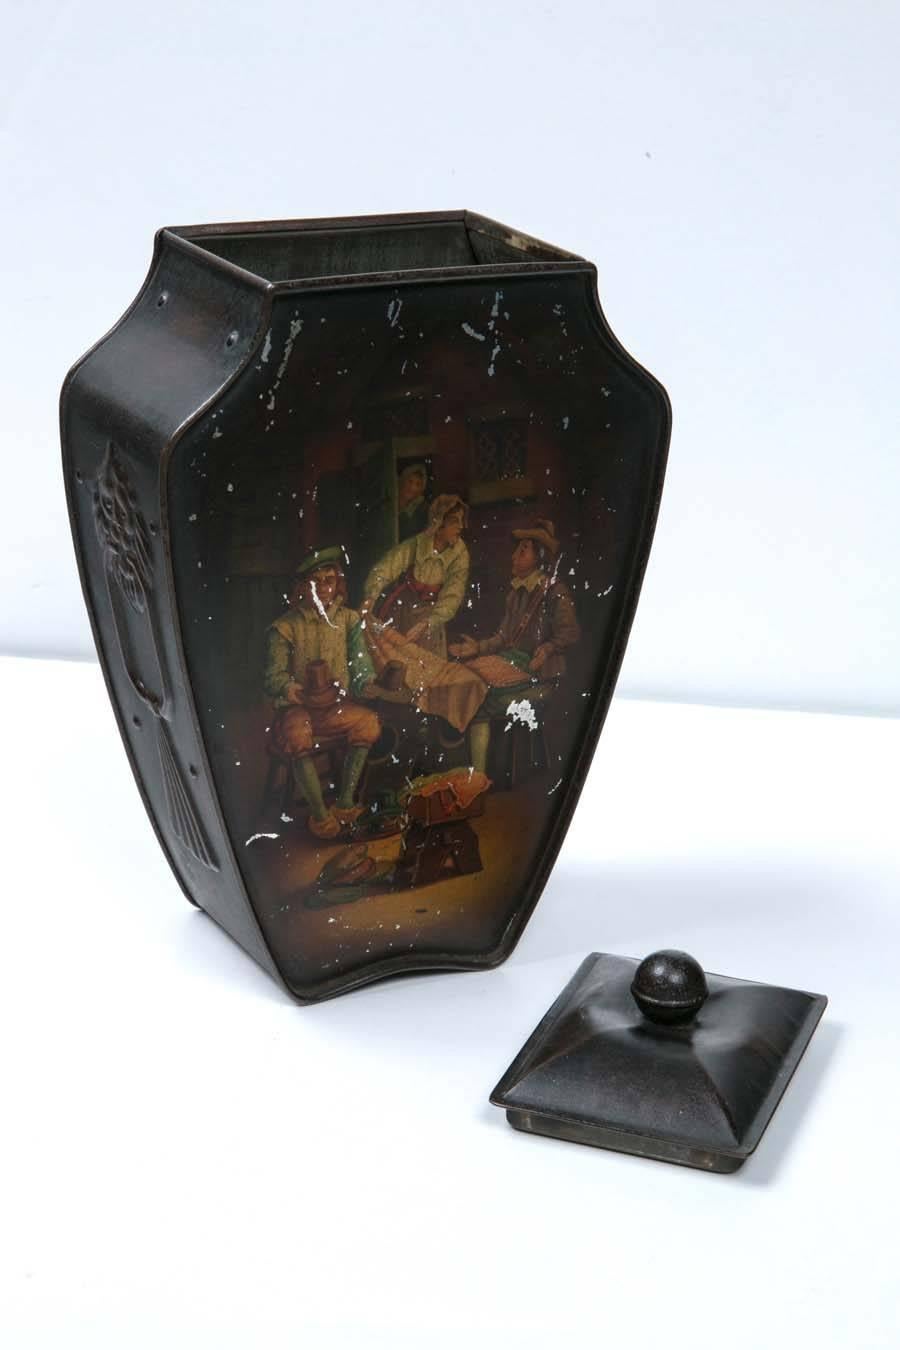 This English biscuit box is circa 1909 by Huntley Palme. Flemish vase with decorative, colorful hand-painted front.